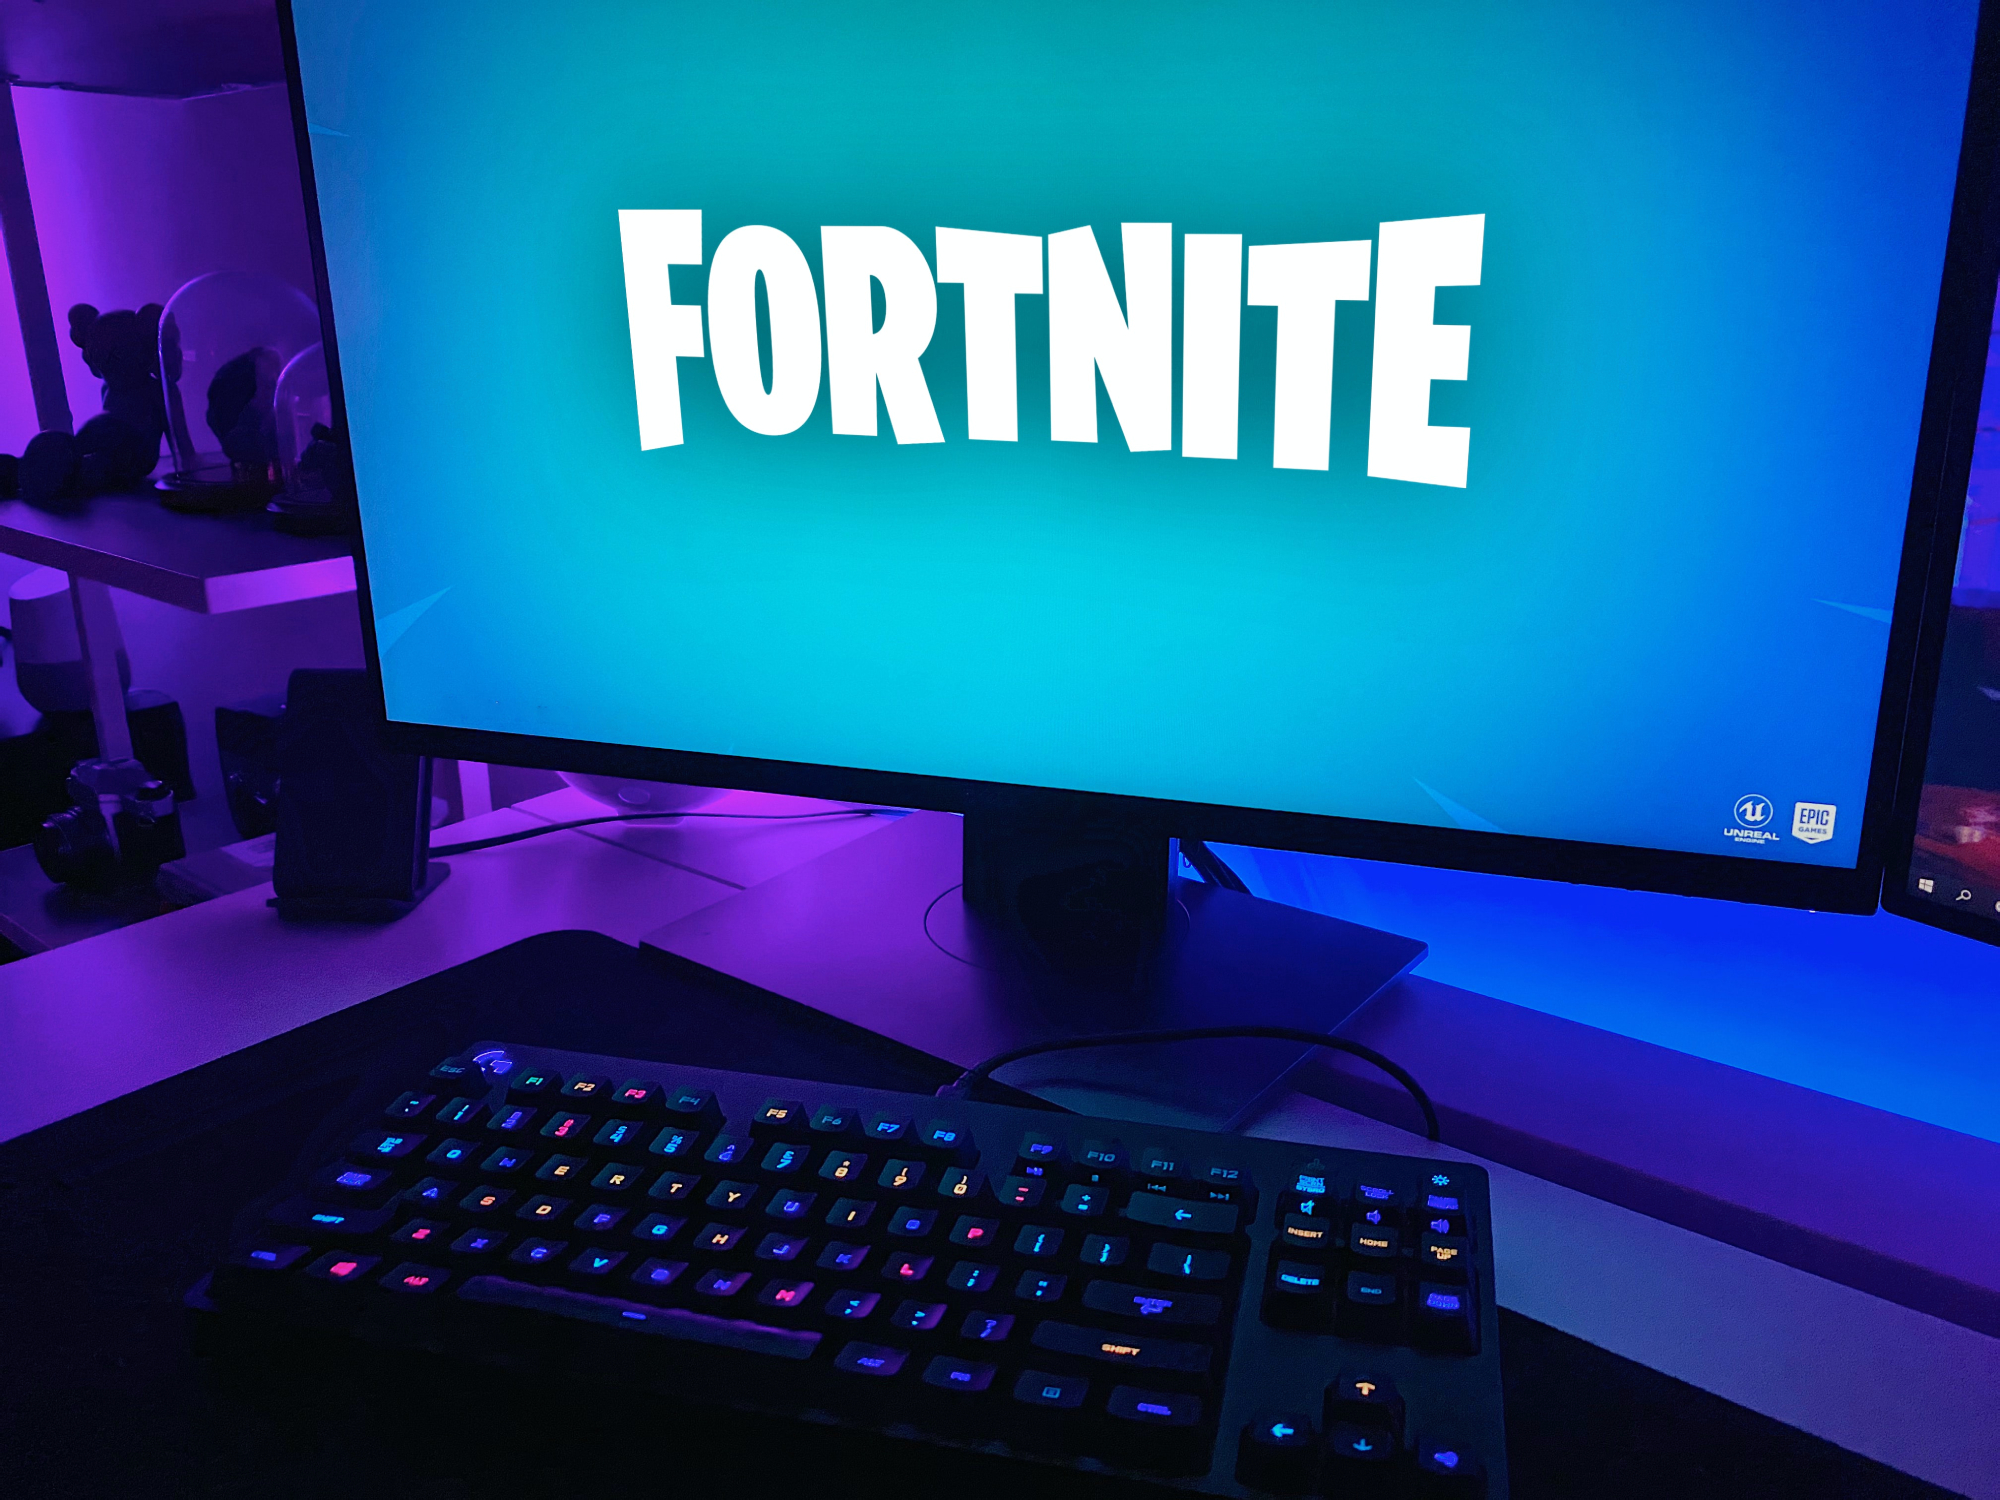 A parent’s guide to playing Fortnite with your kids